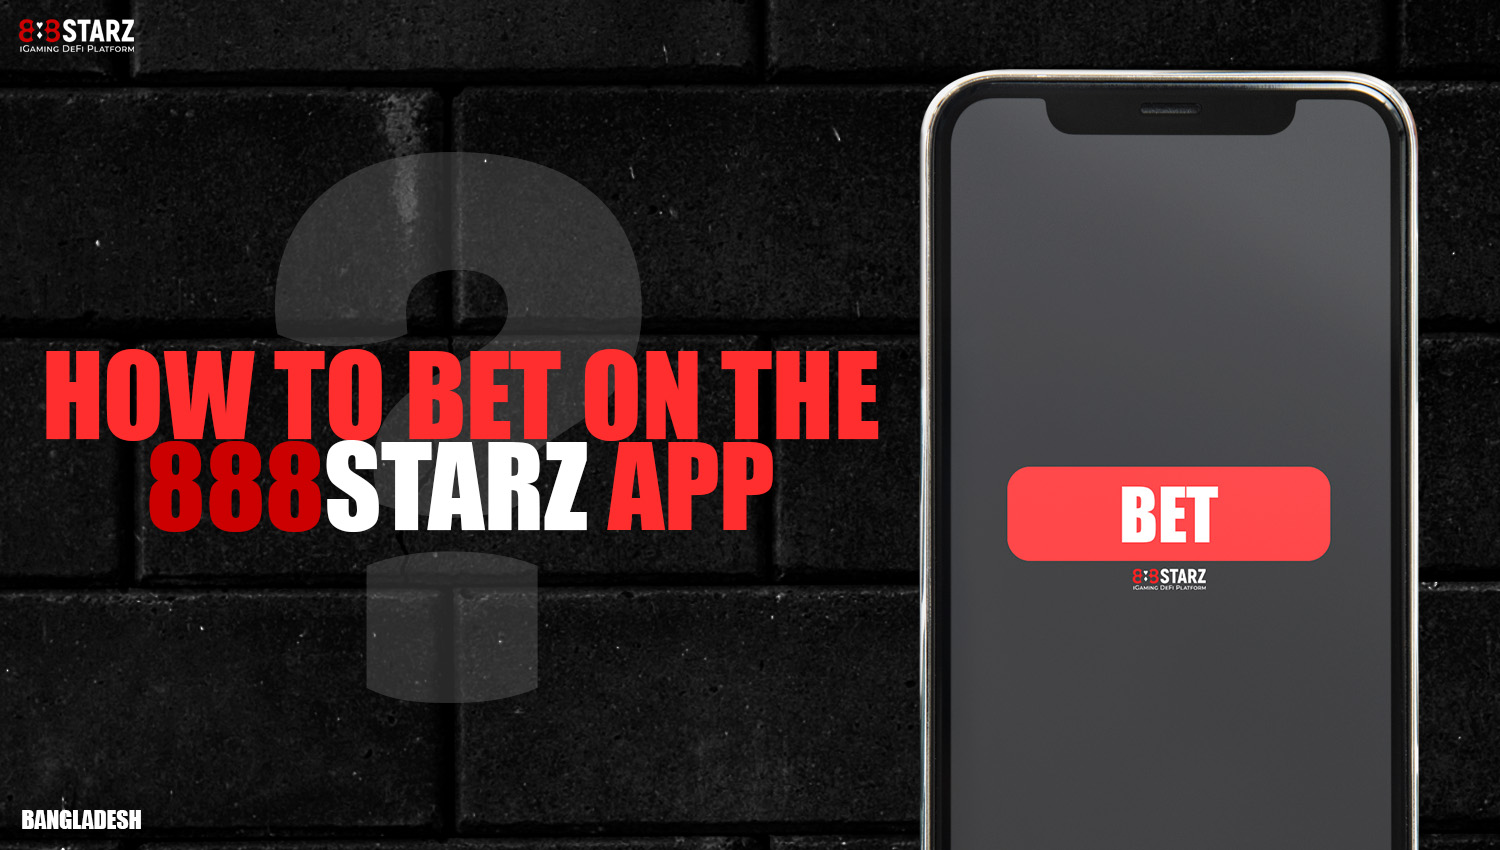 Learn how to start betting with the 888starz mobile app